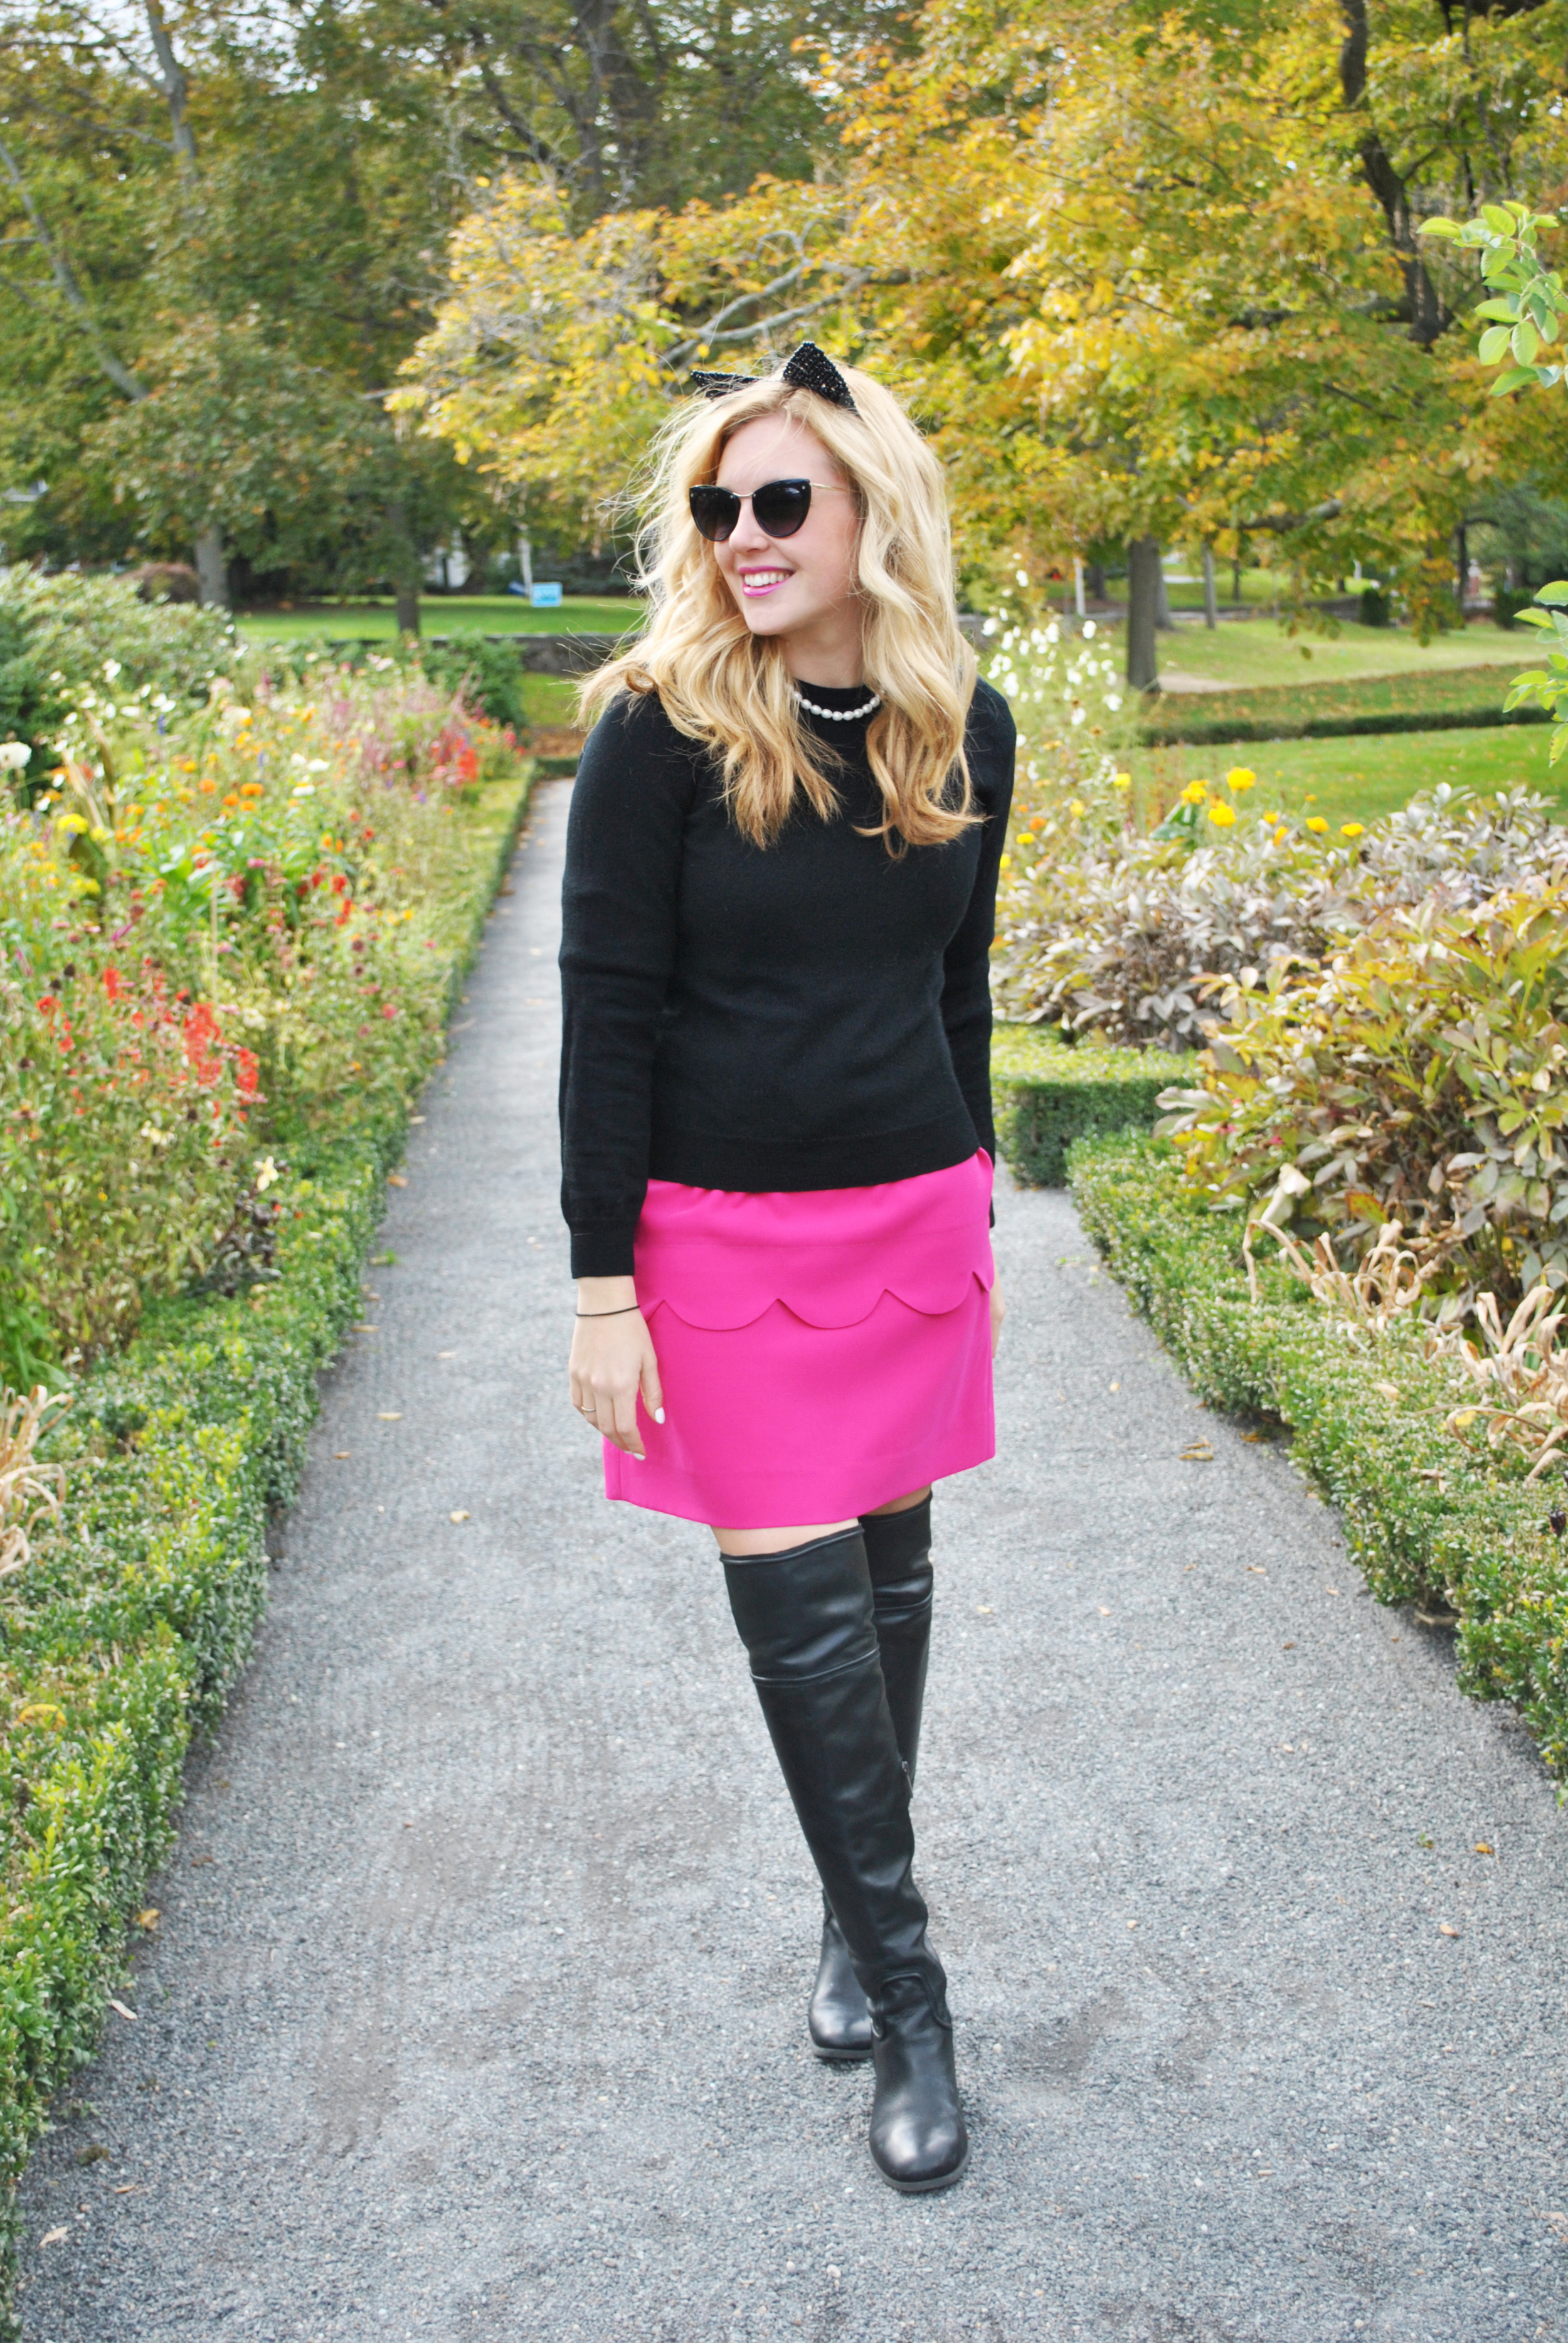 thoughtfulwish | ootd // pink dress // dress and sweater // adopt a cat // cat ears // cat sunglasses // fashion // boston fashion blogger // boston fashion // new england fashion 